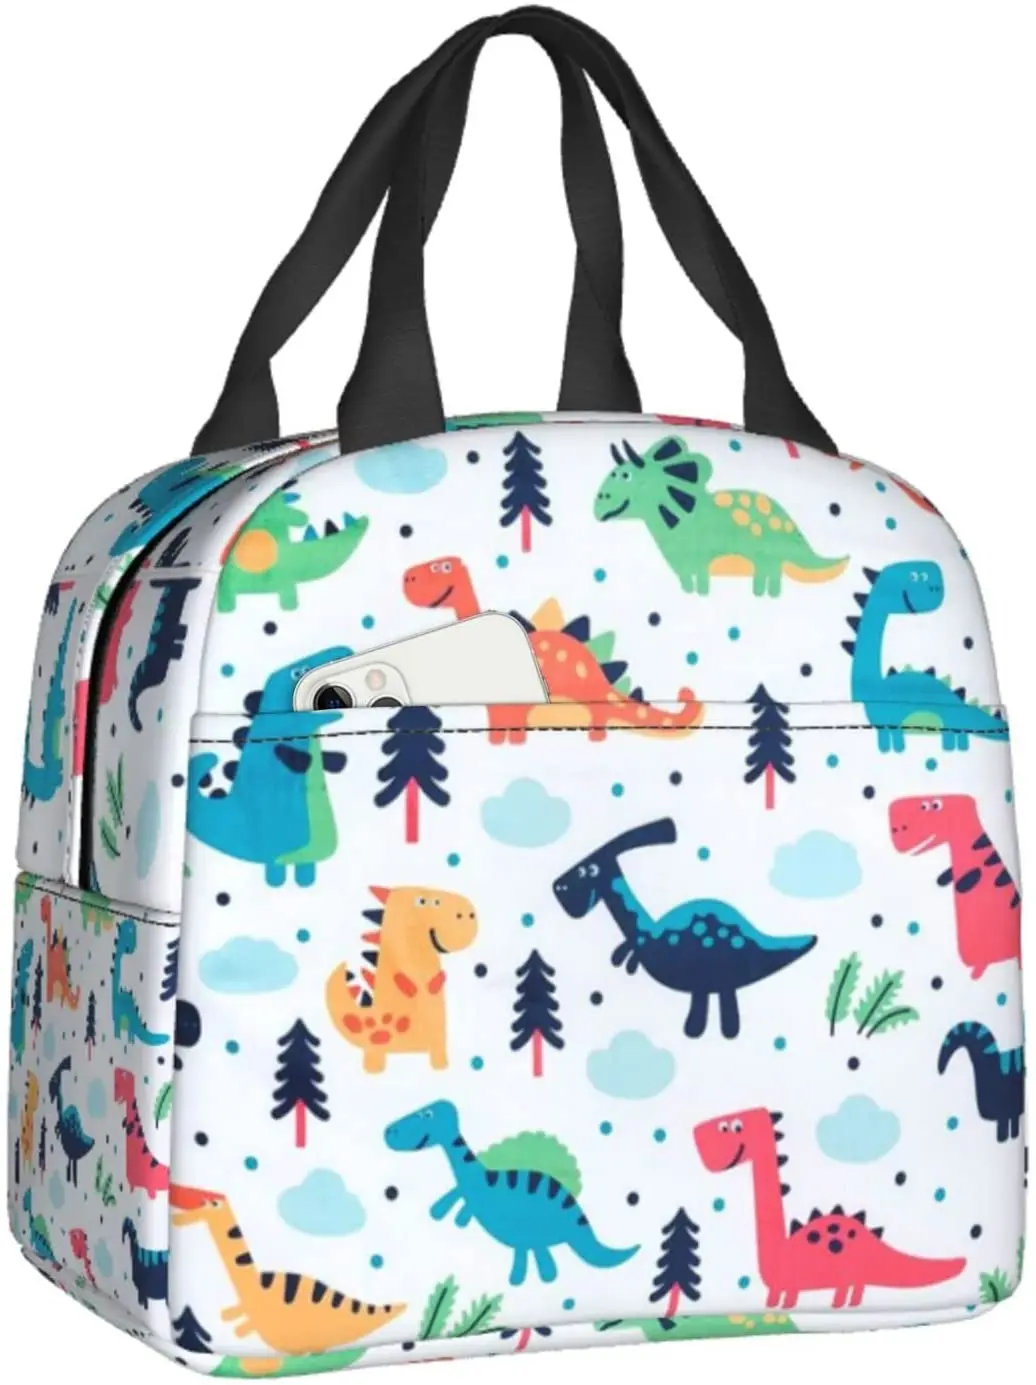 Kids Lunch Bag Insulated Lunch Box Cartoon Dinosaurs Reusable Cooler Tote Bag Cooler Adult Office Work Picnic Beach Travel